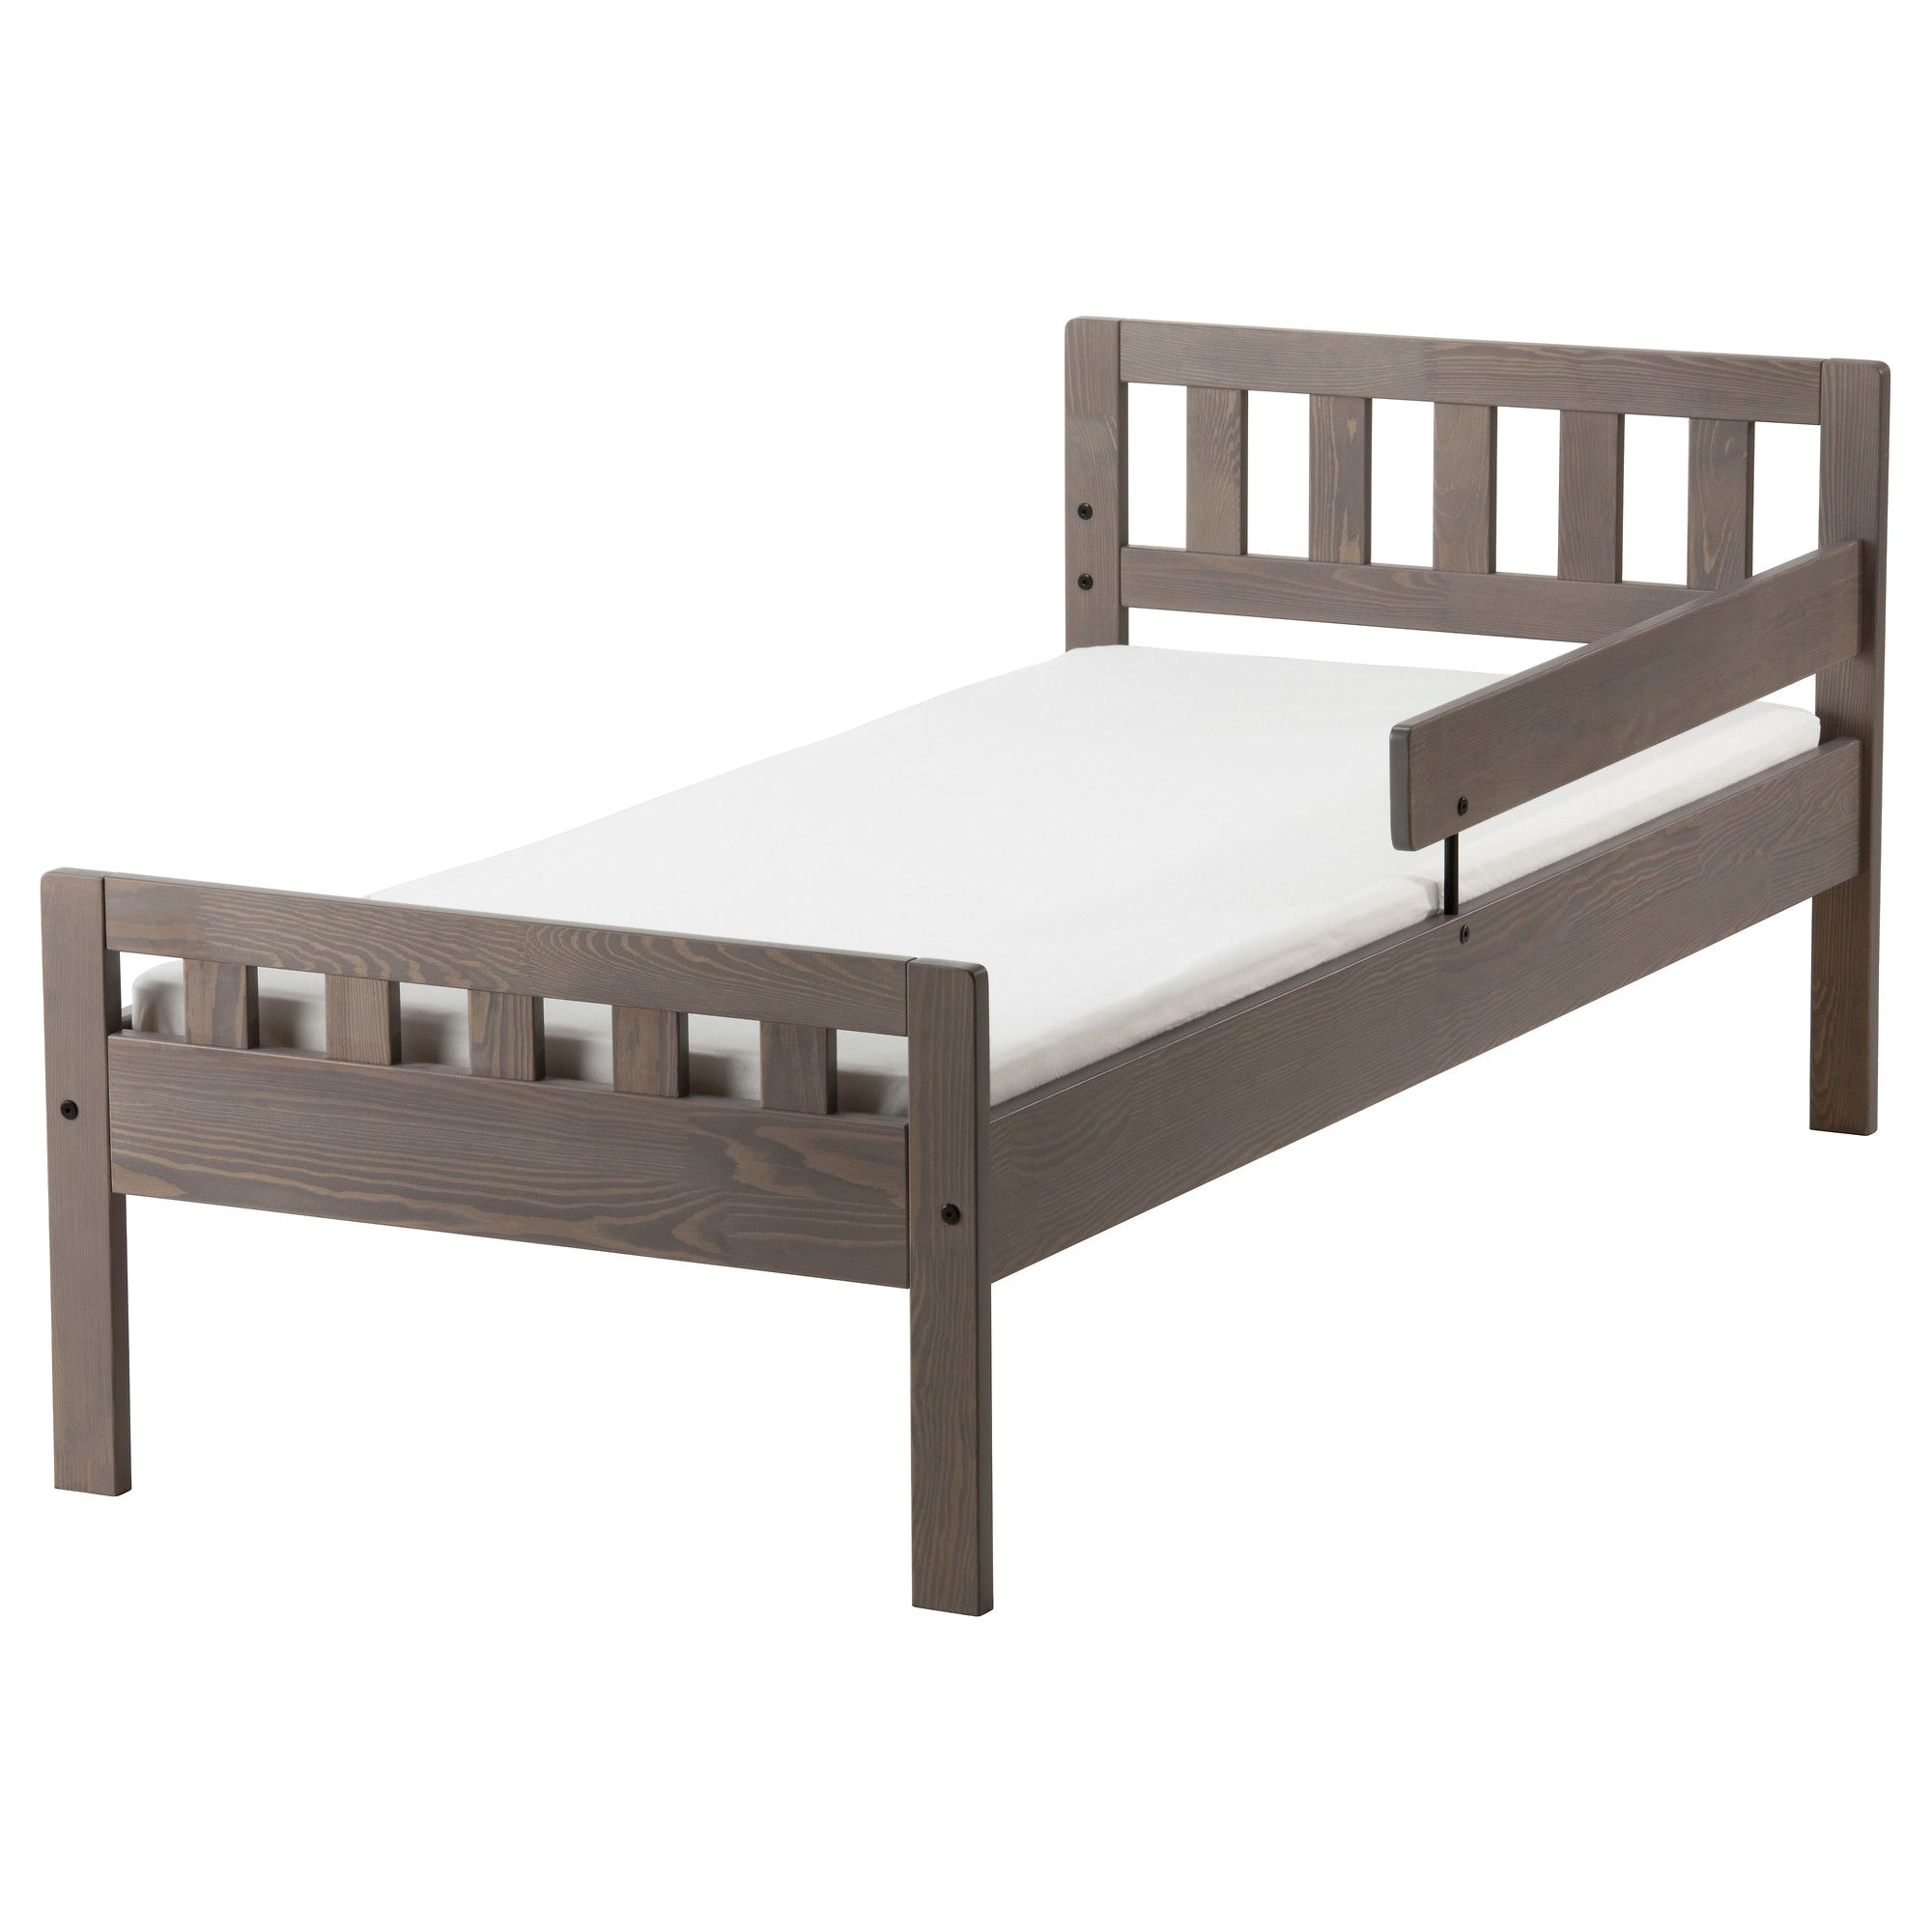 ikea mygga bed frame with slatted bed base solid wood a hard wearing natural material